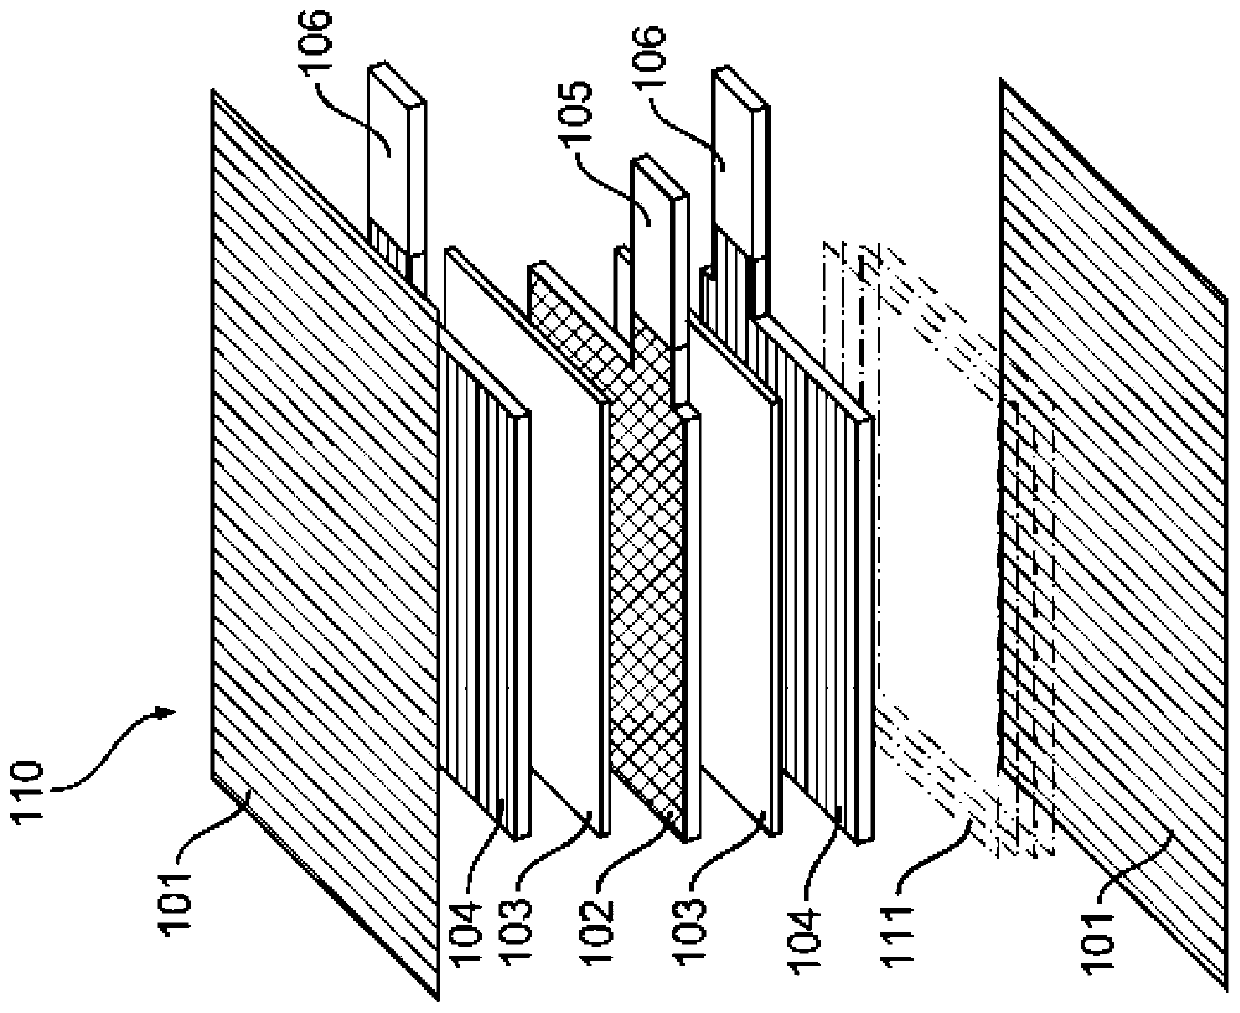 Flexible battery as integration platform for wearable sensors and processing/transmitting devices